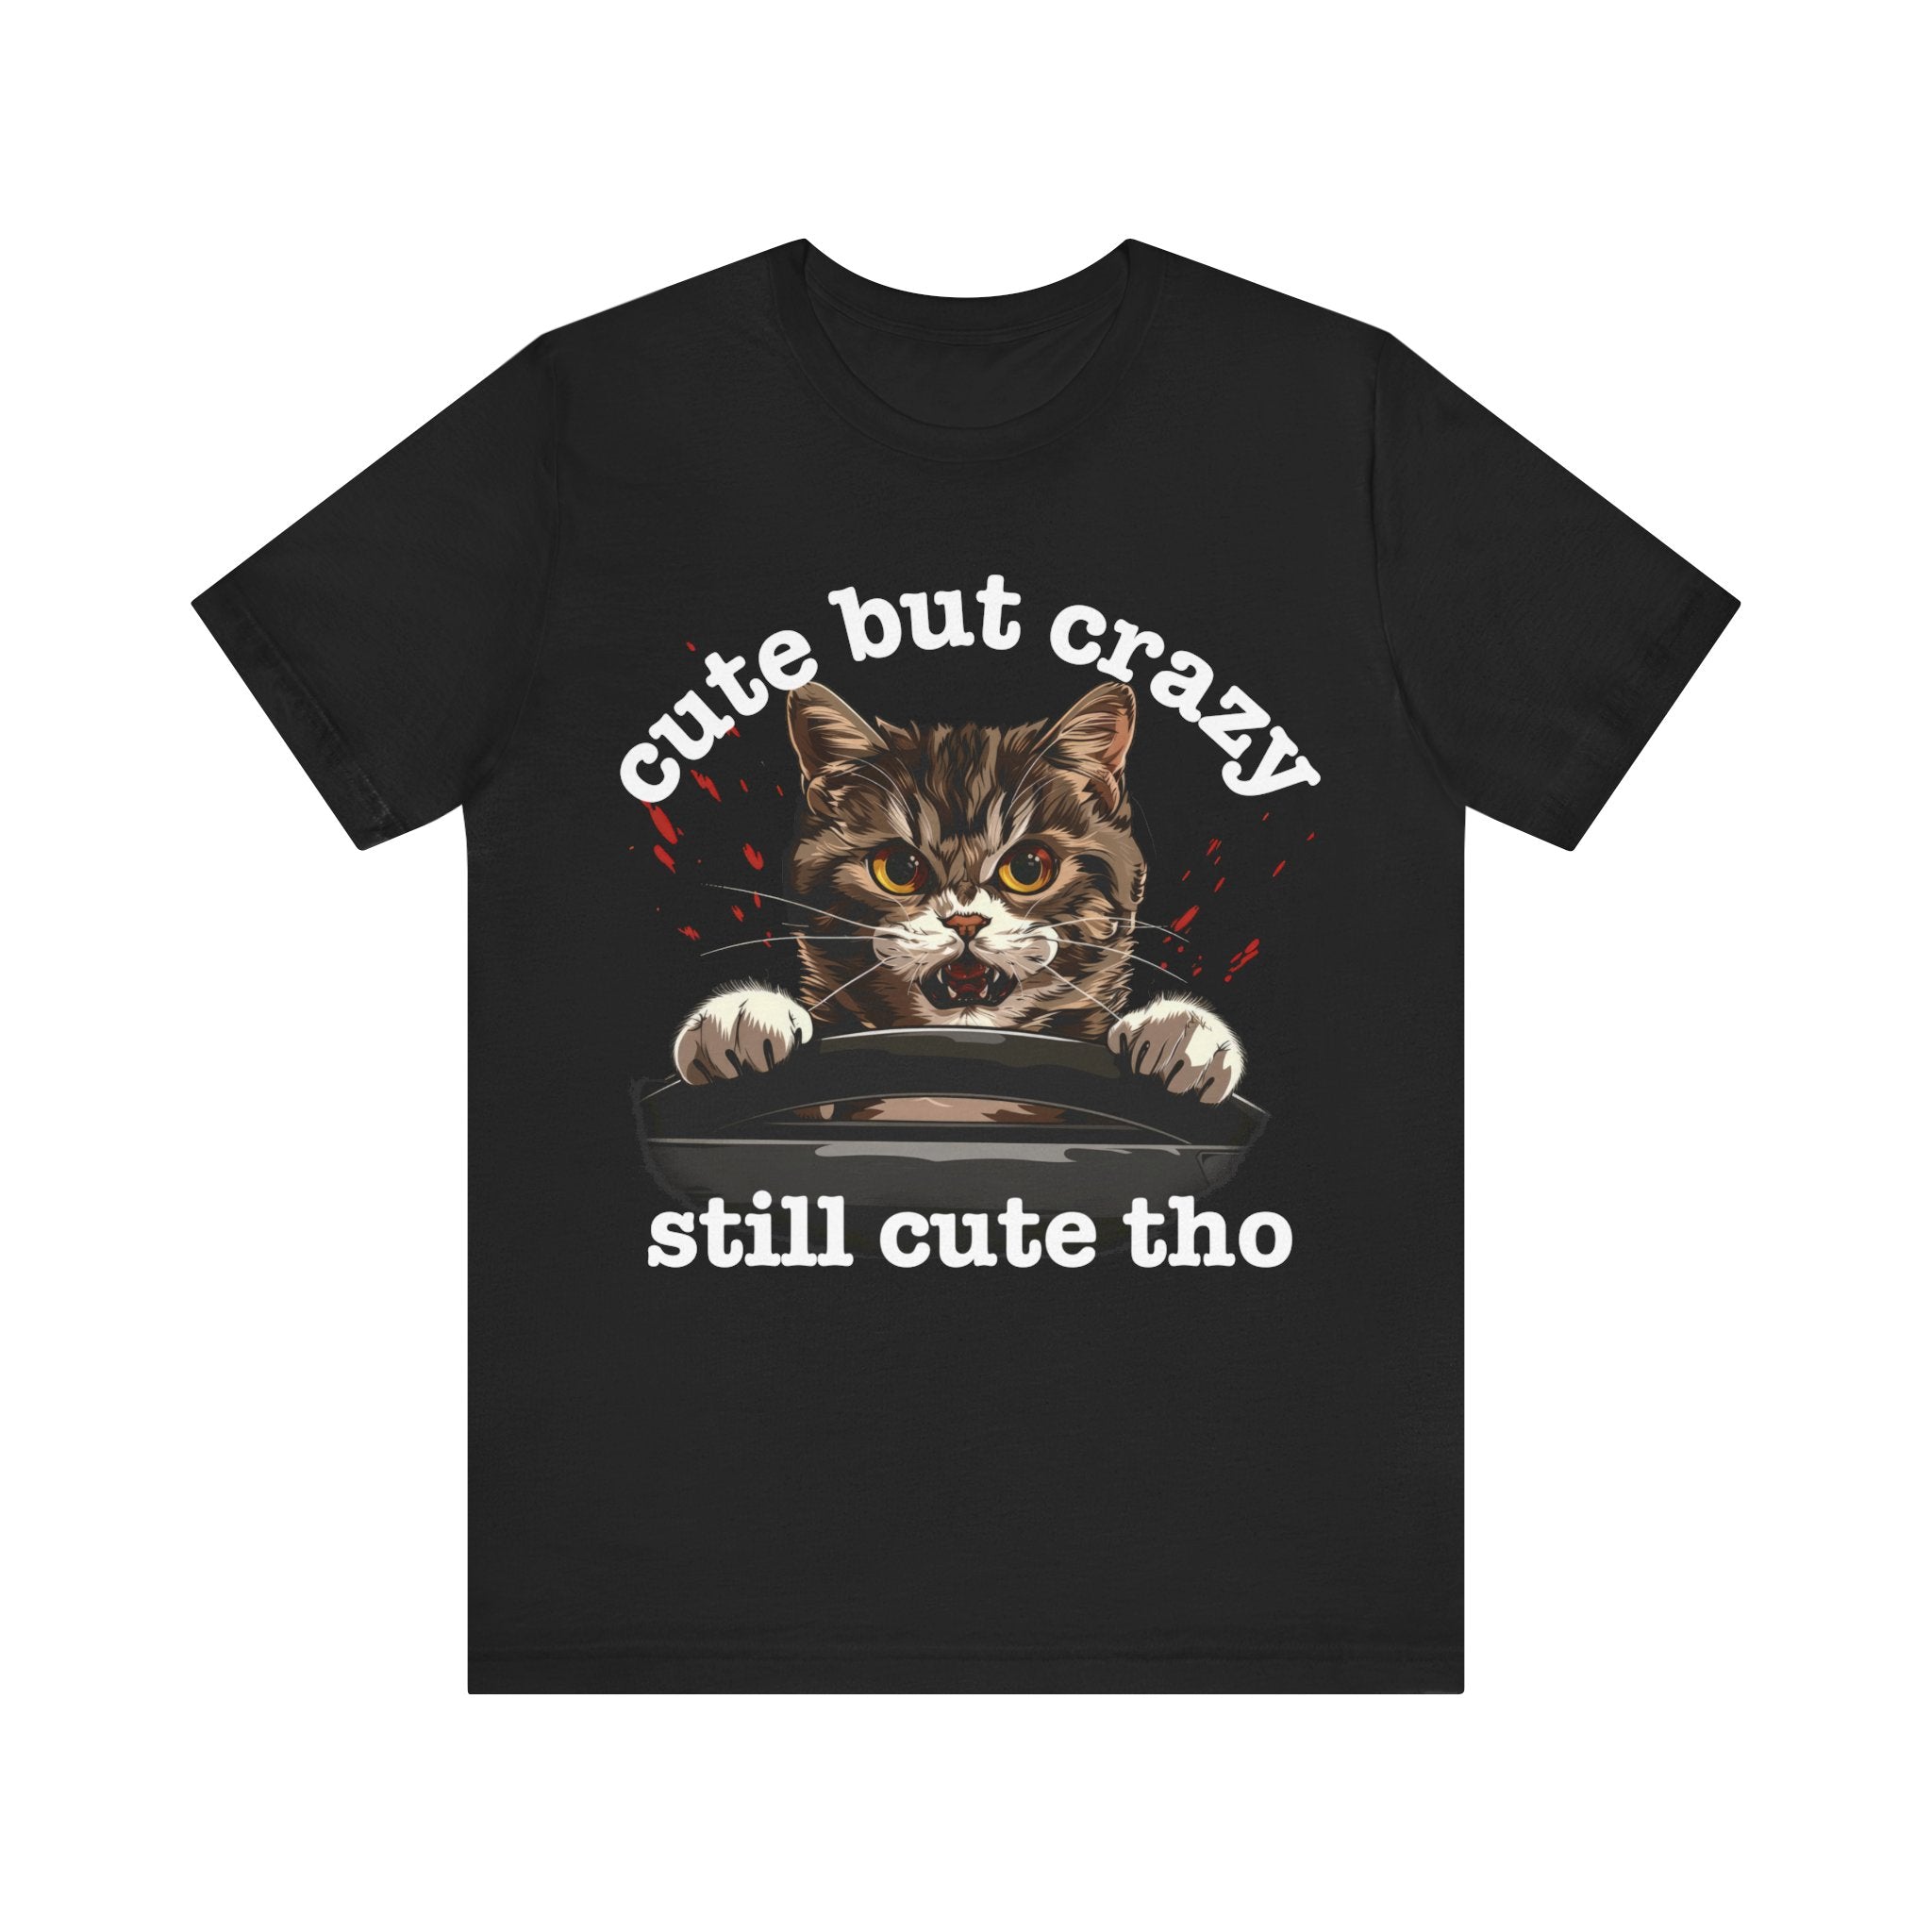 Funny Cat T-Shirt - Cute But Crazy Still Cute Tho - Cat Lover Gift - Pet Humor Graphic Tee - Unisex Adult T-Shirt - Various Colors